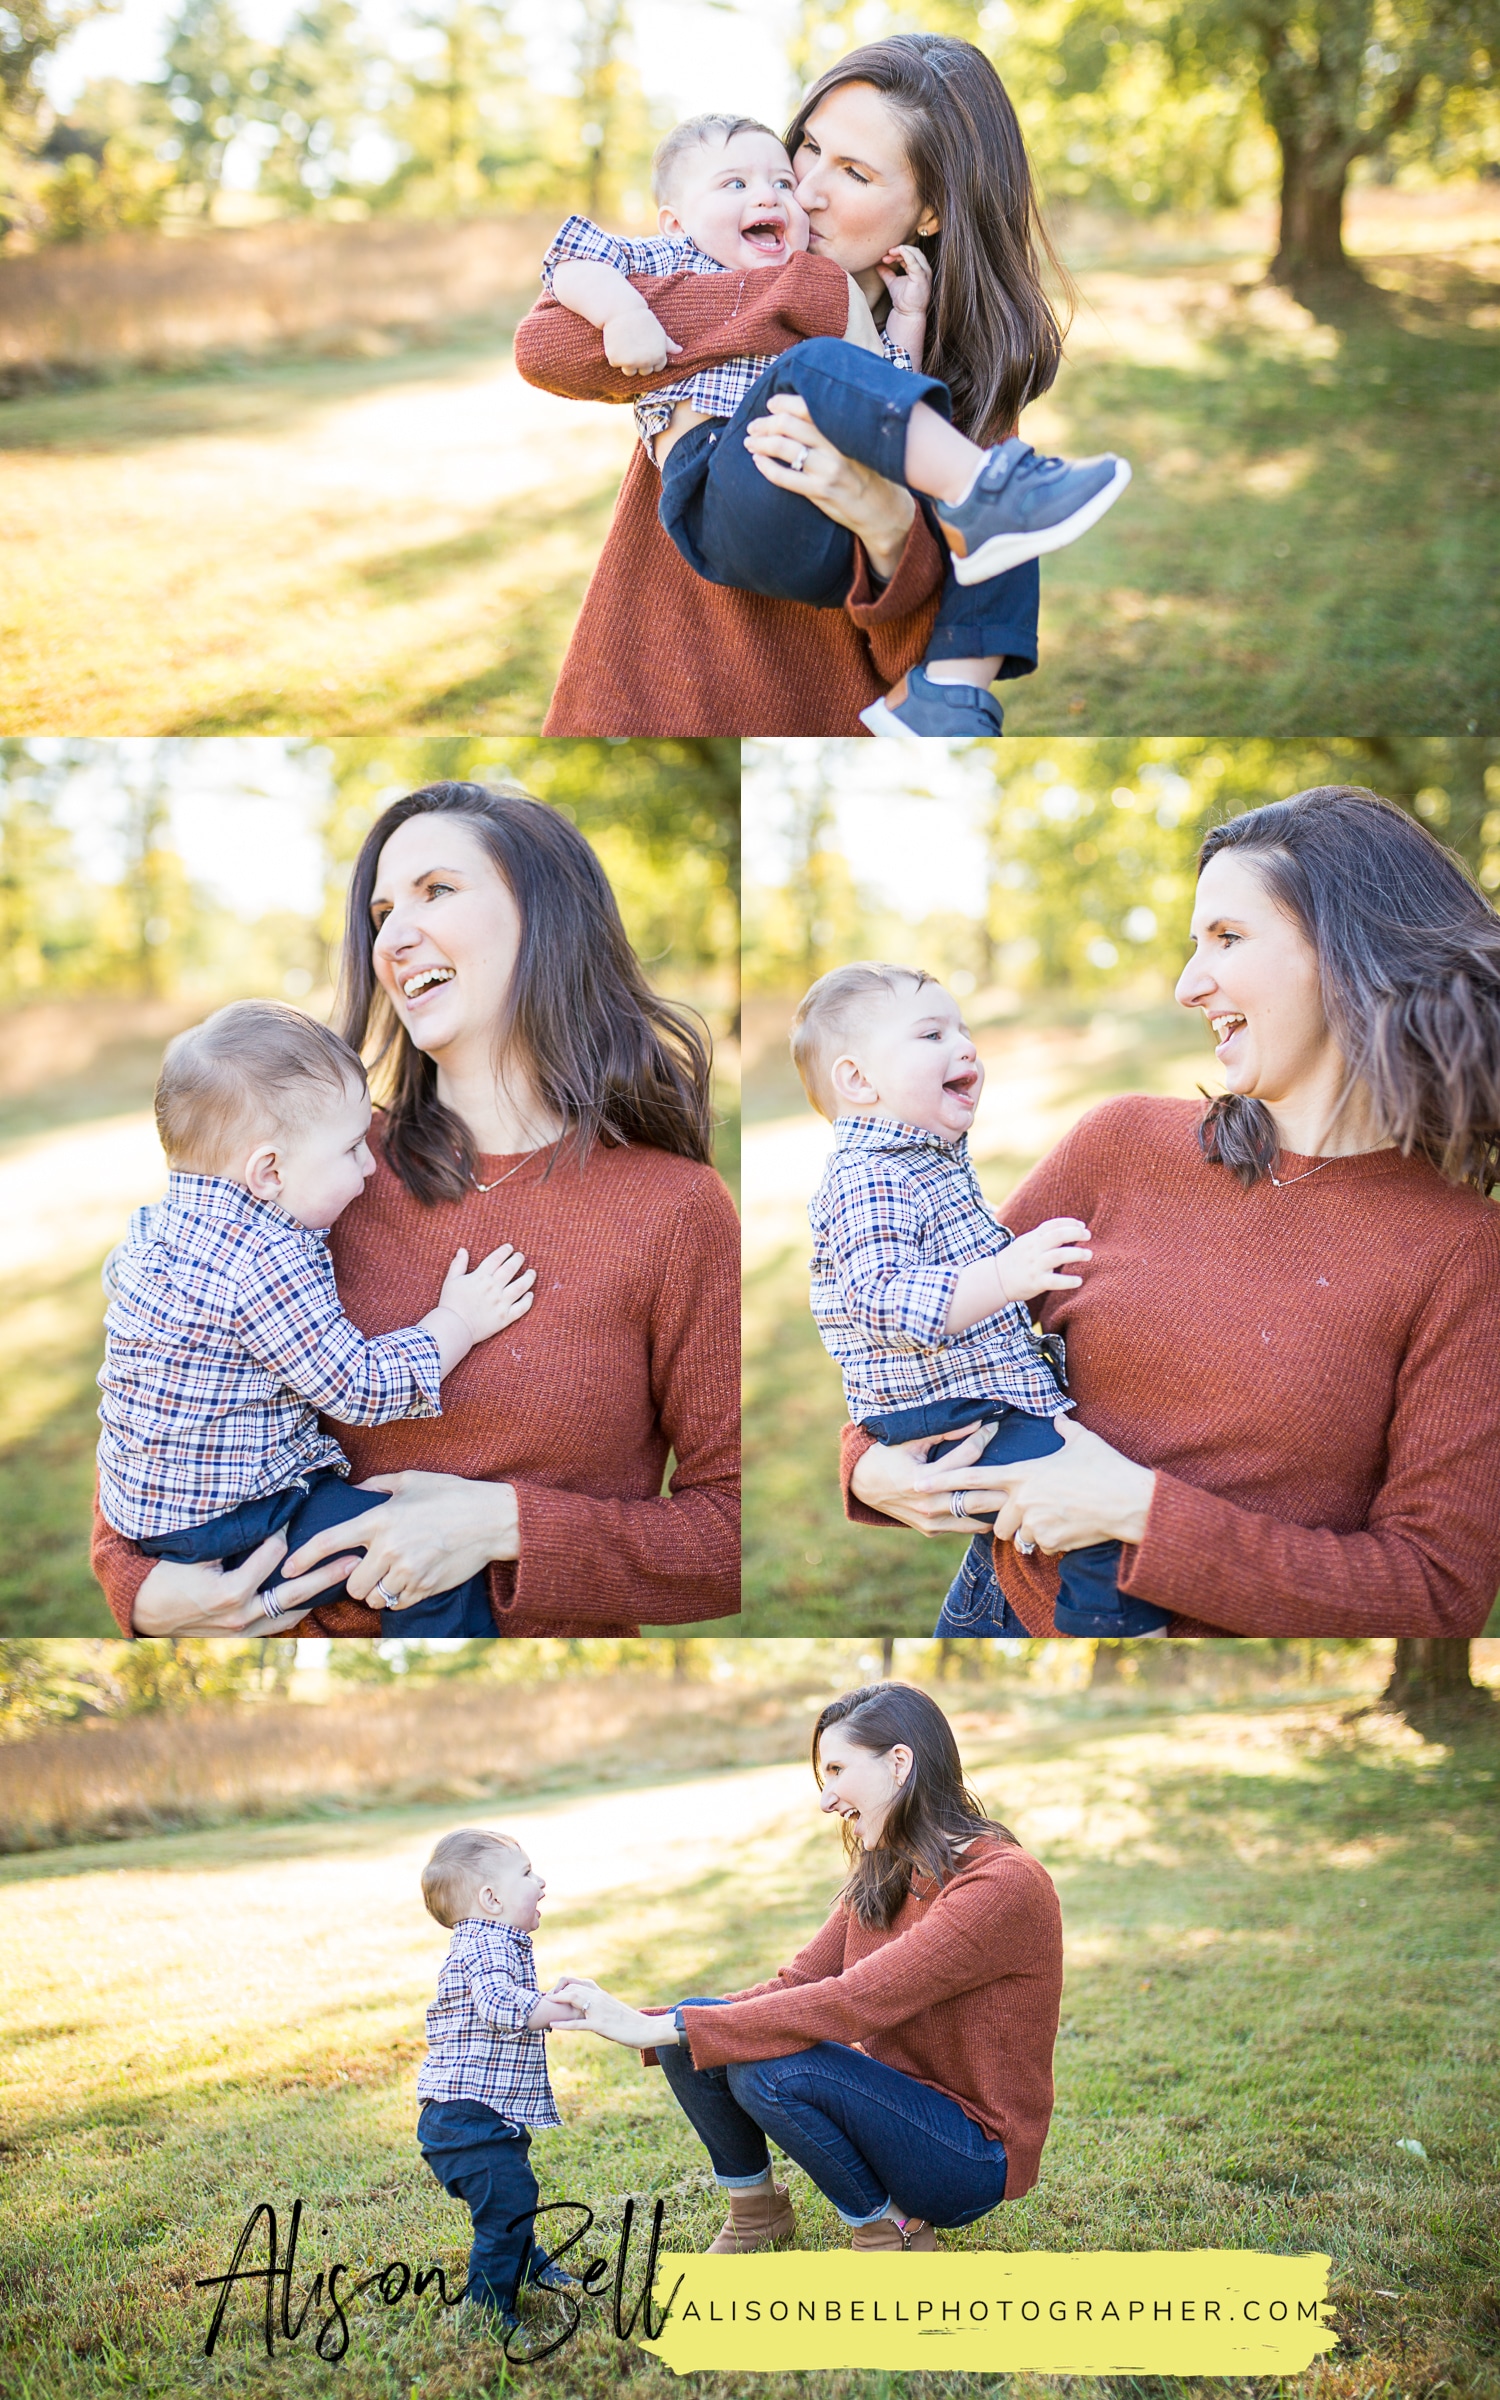 Baby's one year photo session, first birthday family photography session in Northern Virginia by Alison Bell, Photographer. alisonbellphotographer.com